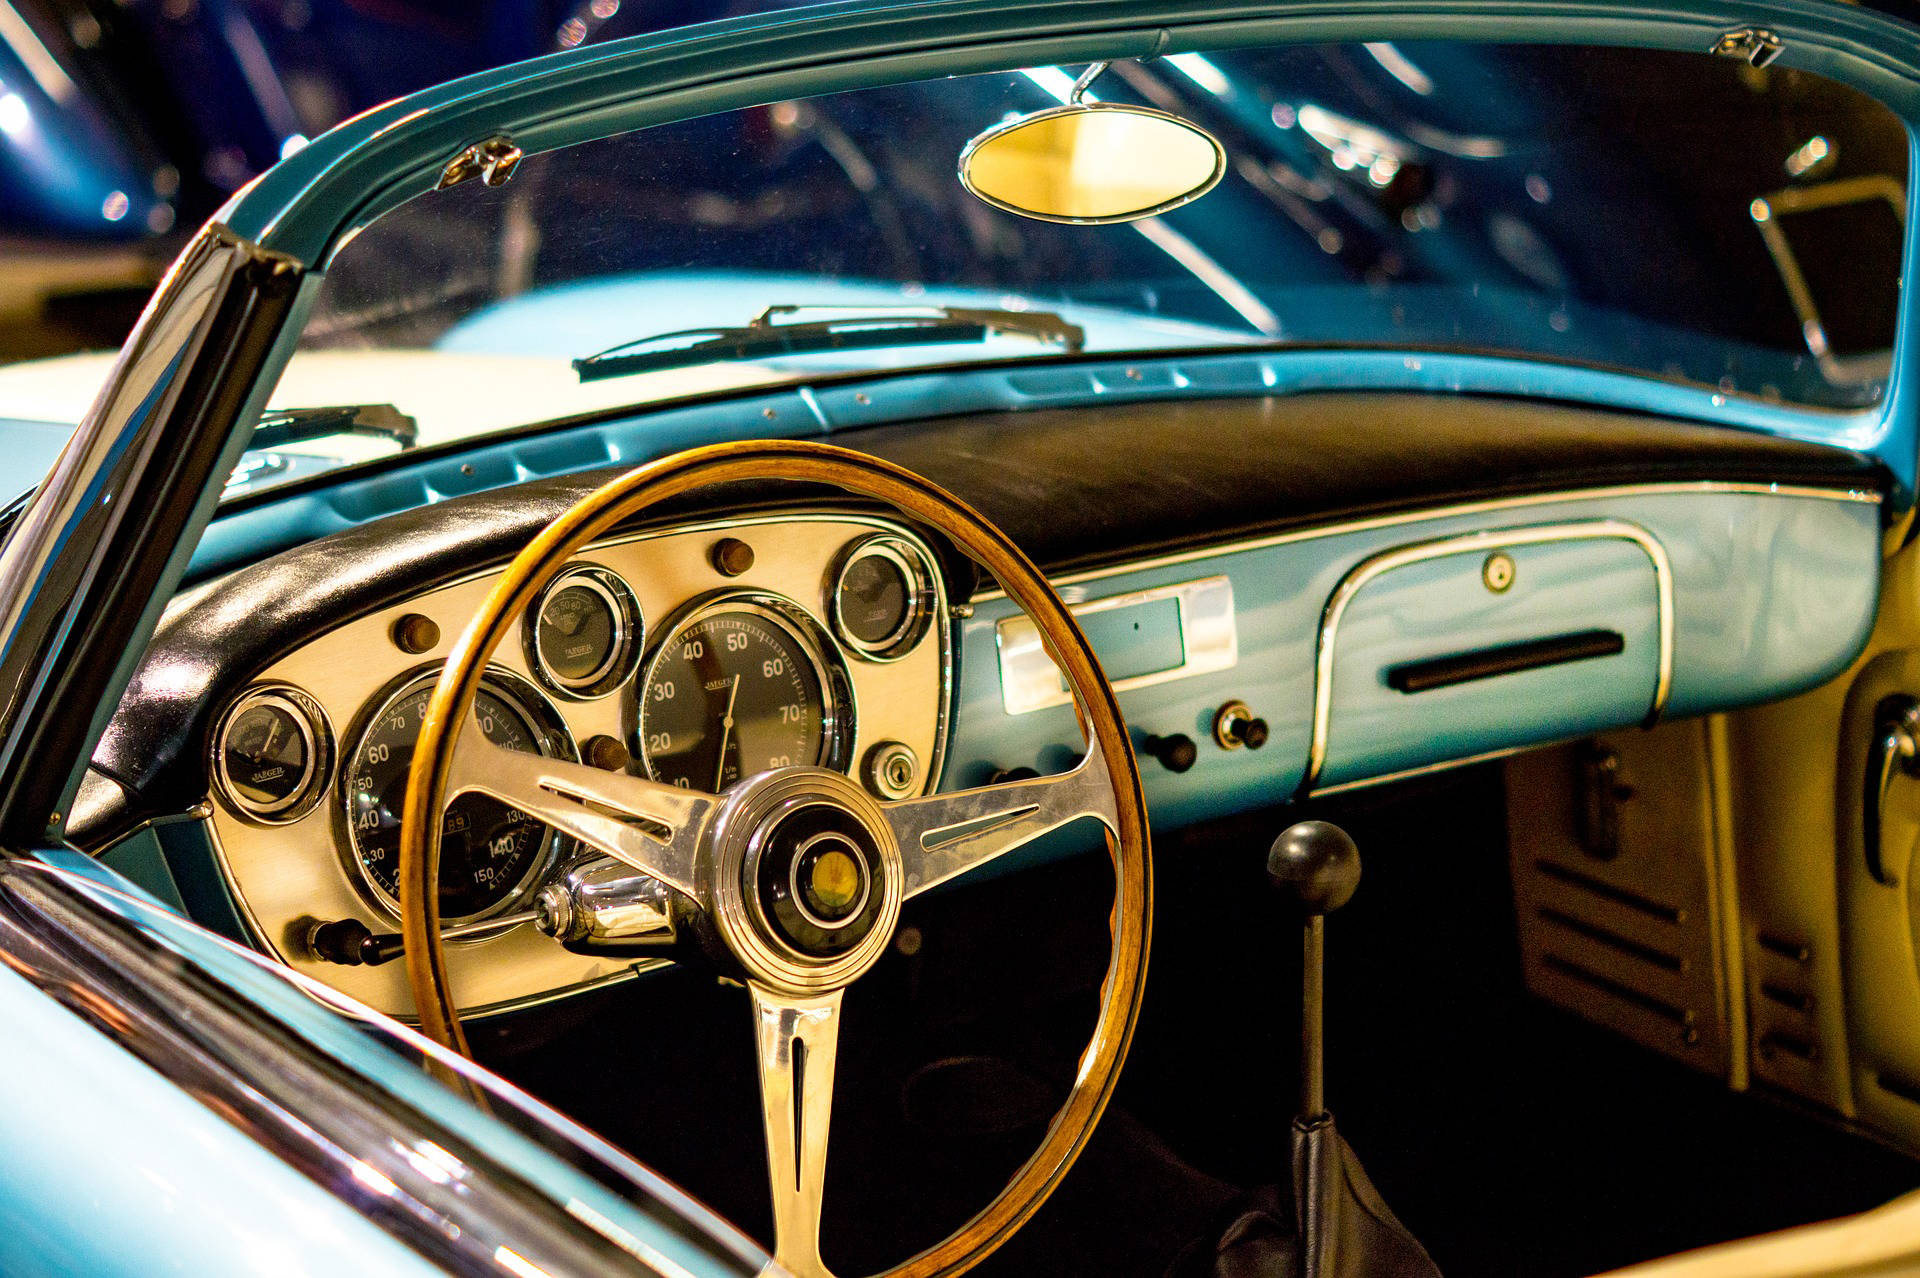 Classic car show this weekend